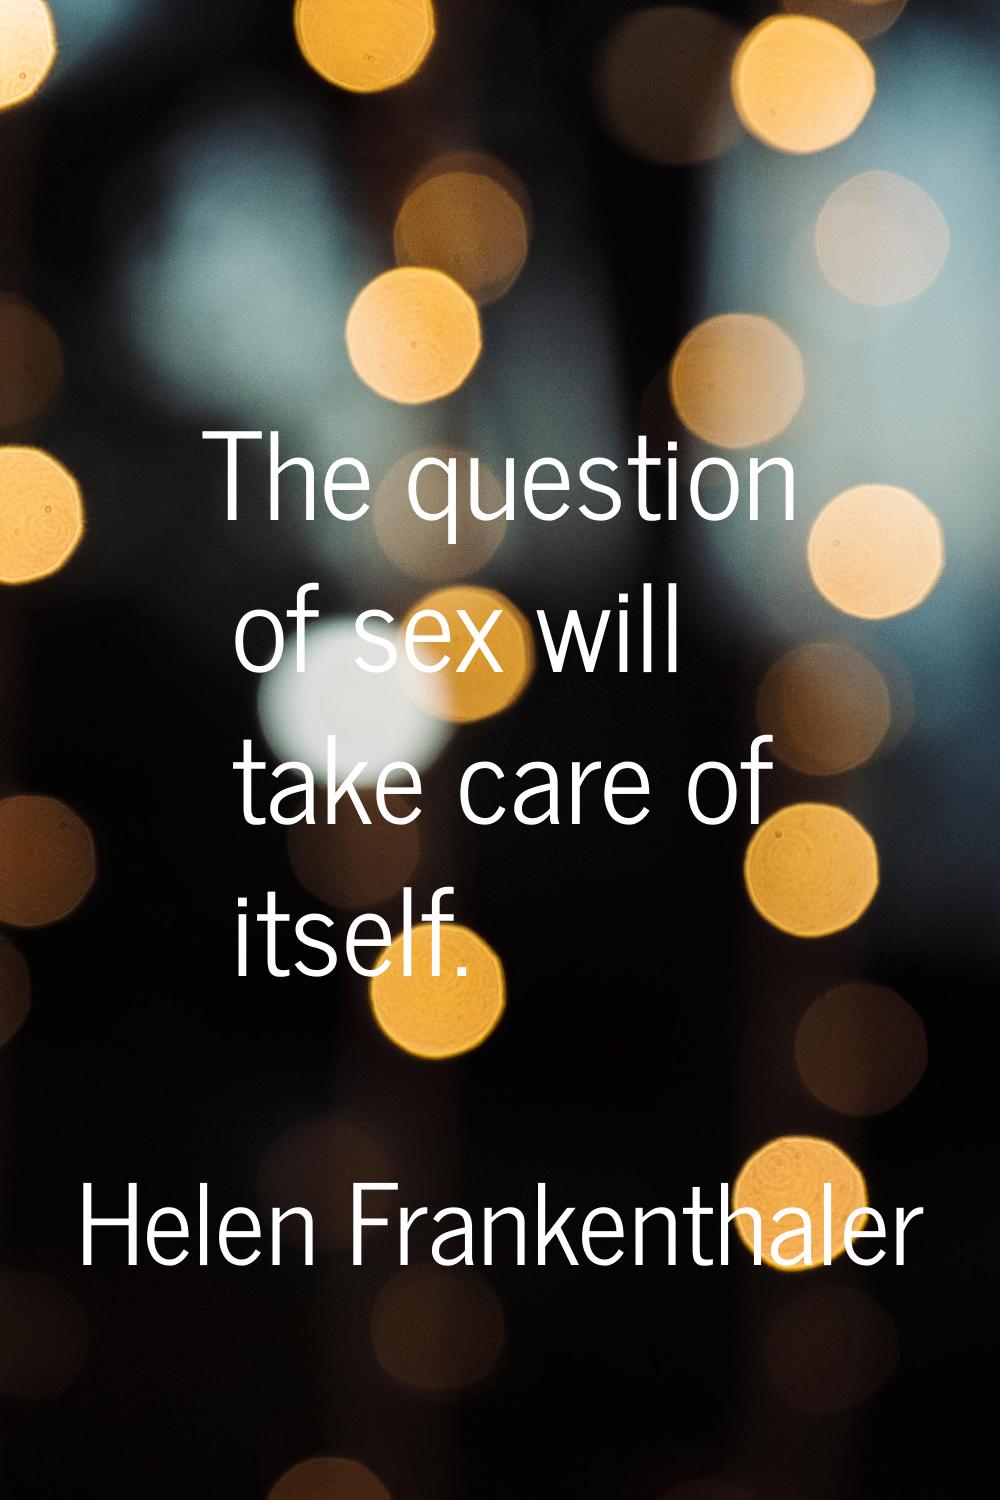 The question of sex will take care of itself.